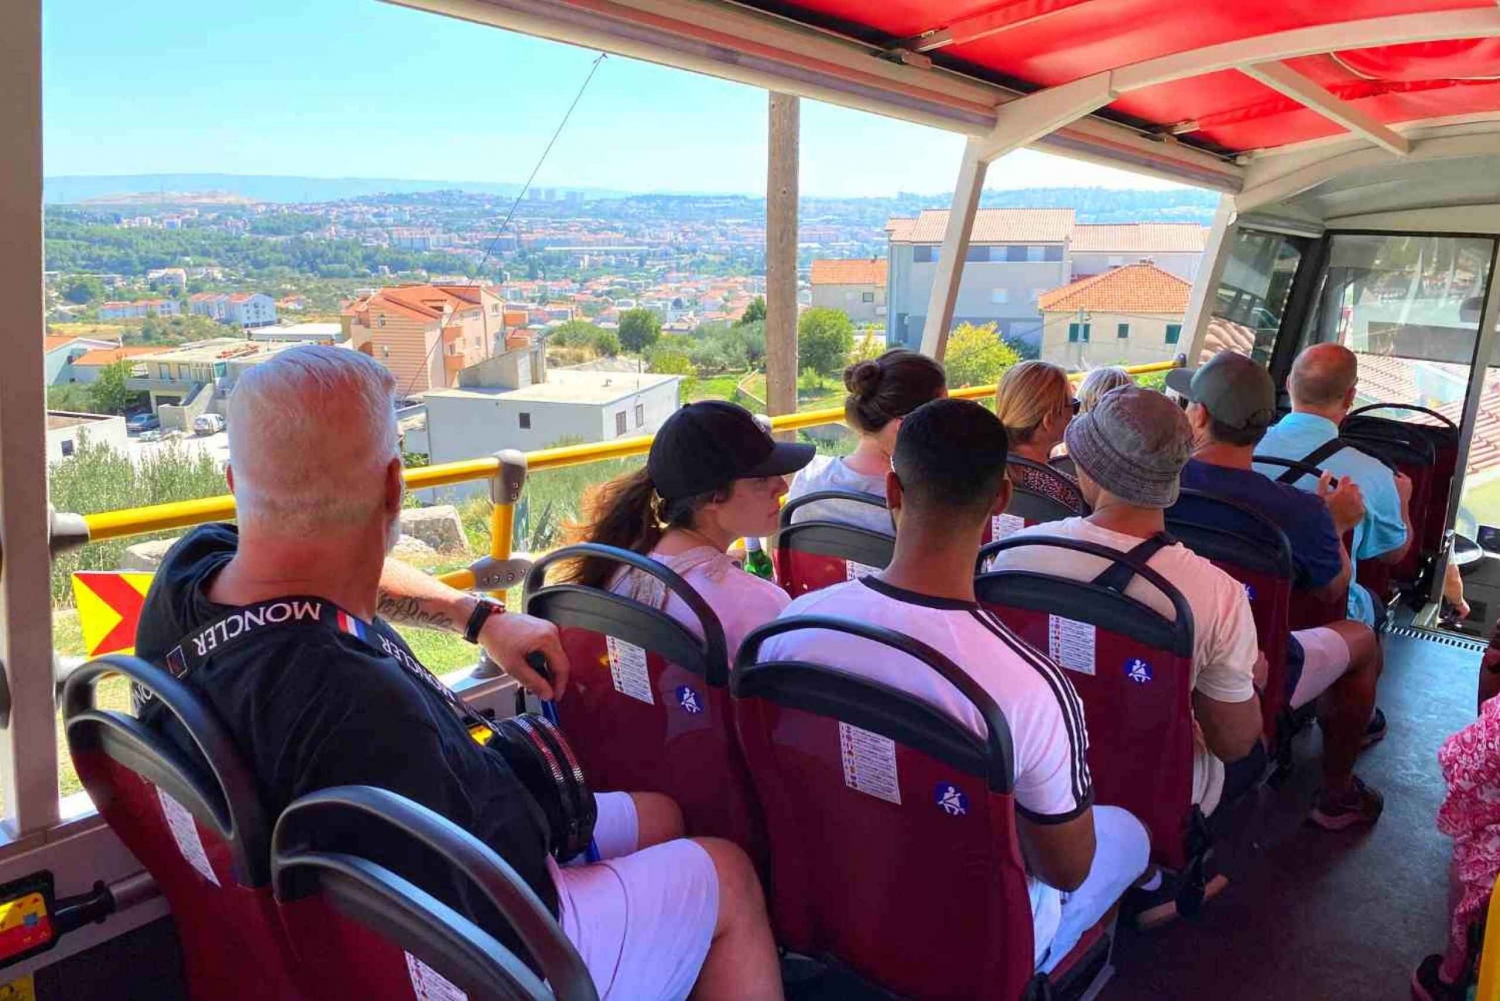 Split: Dalmatian Countryside Open-Top Bus Tour with Stops